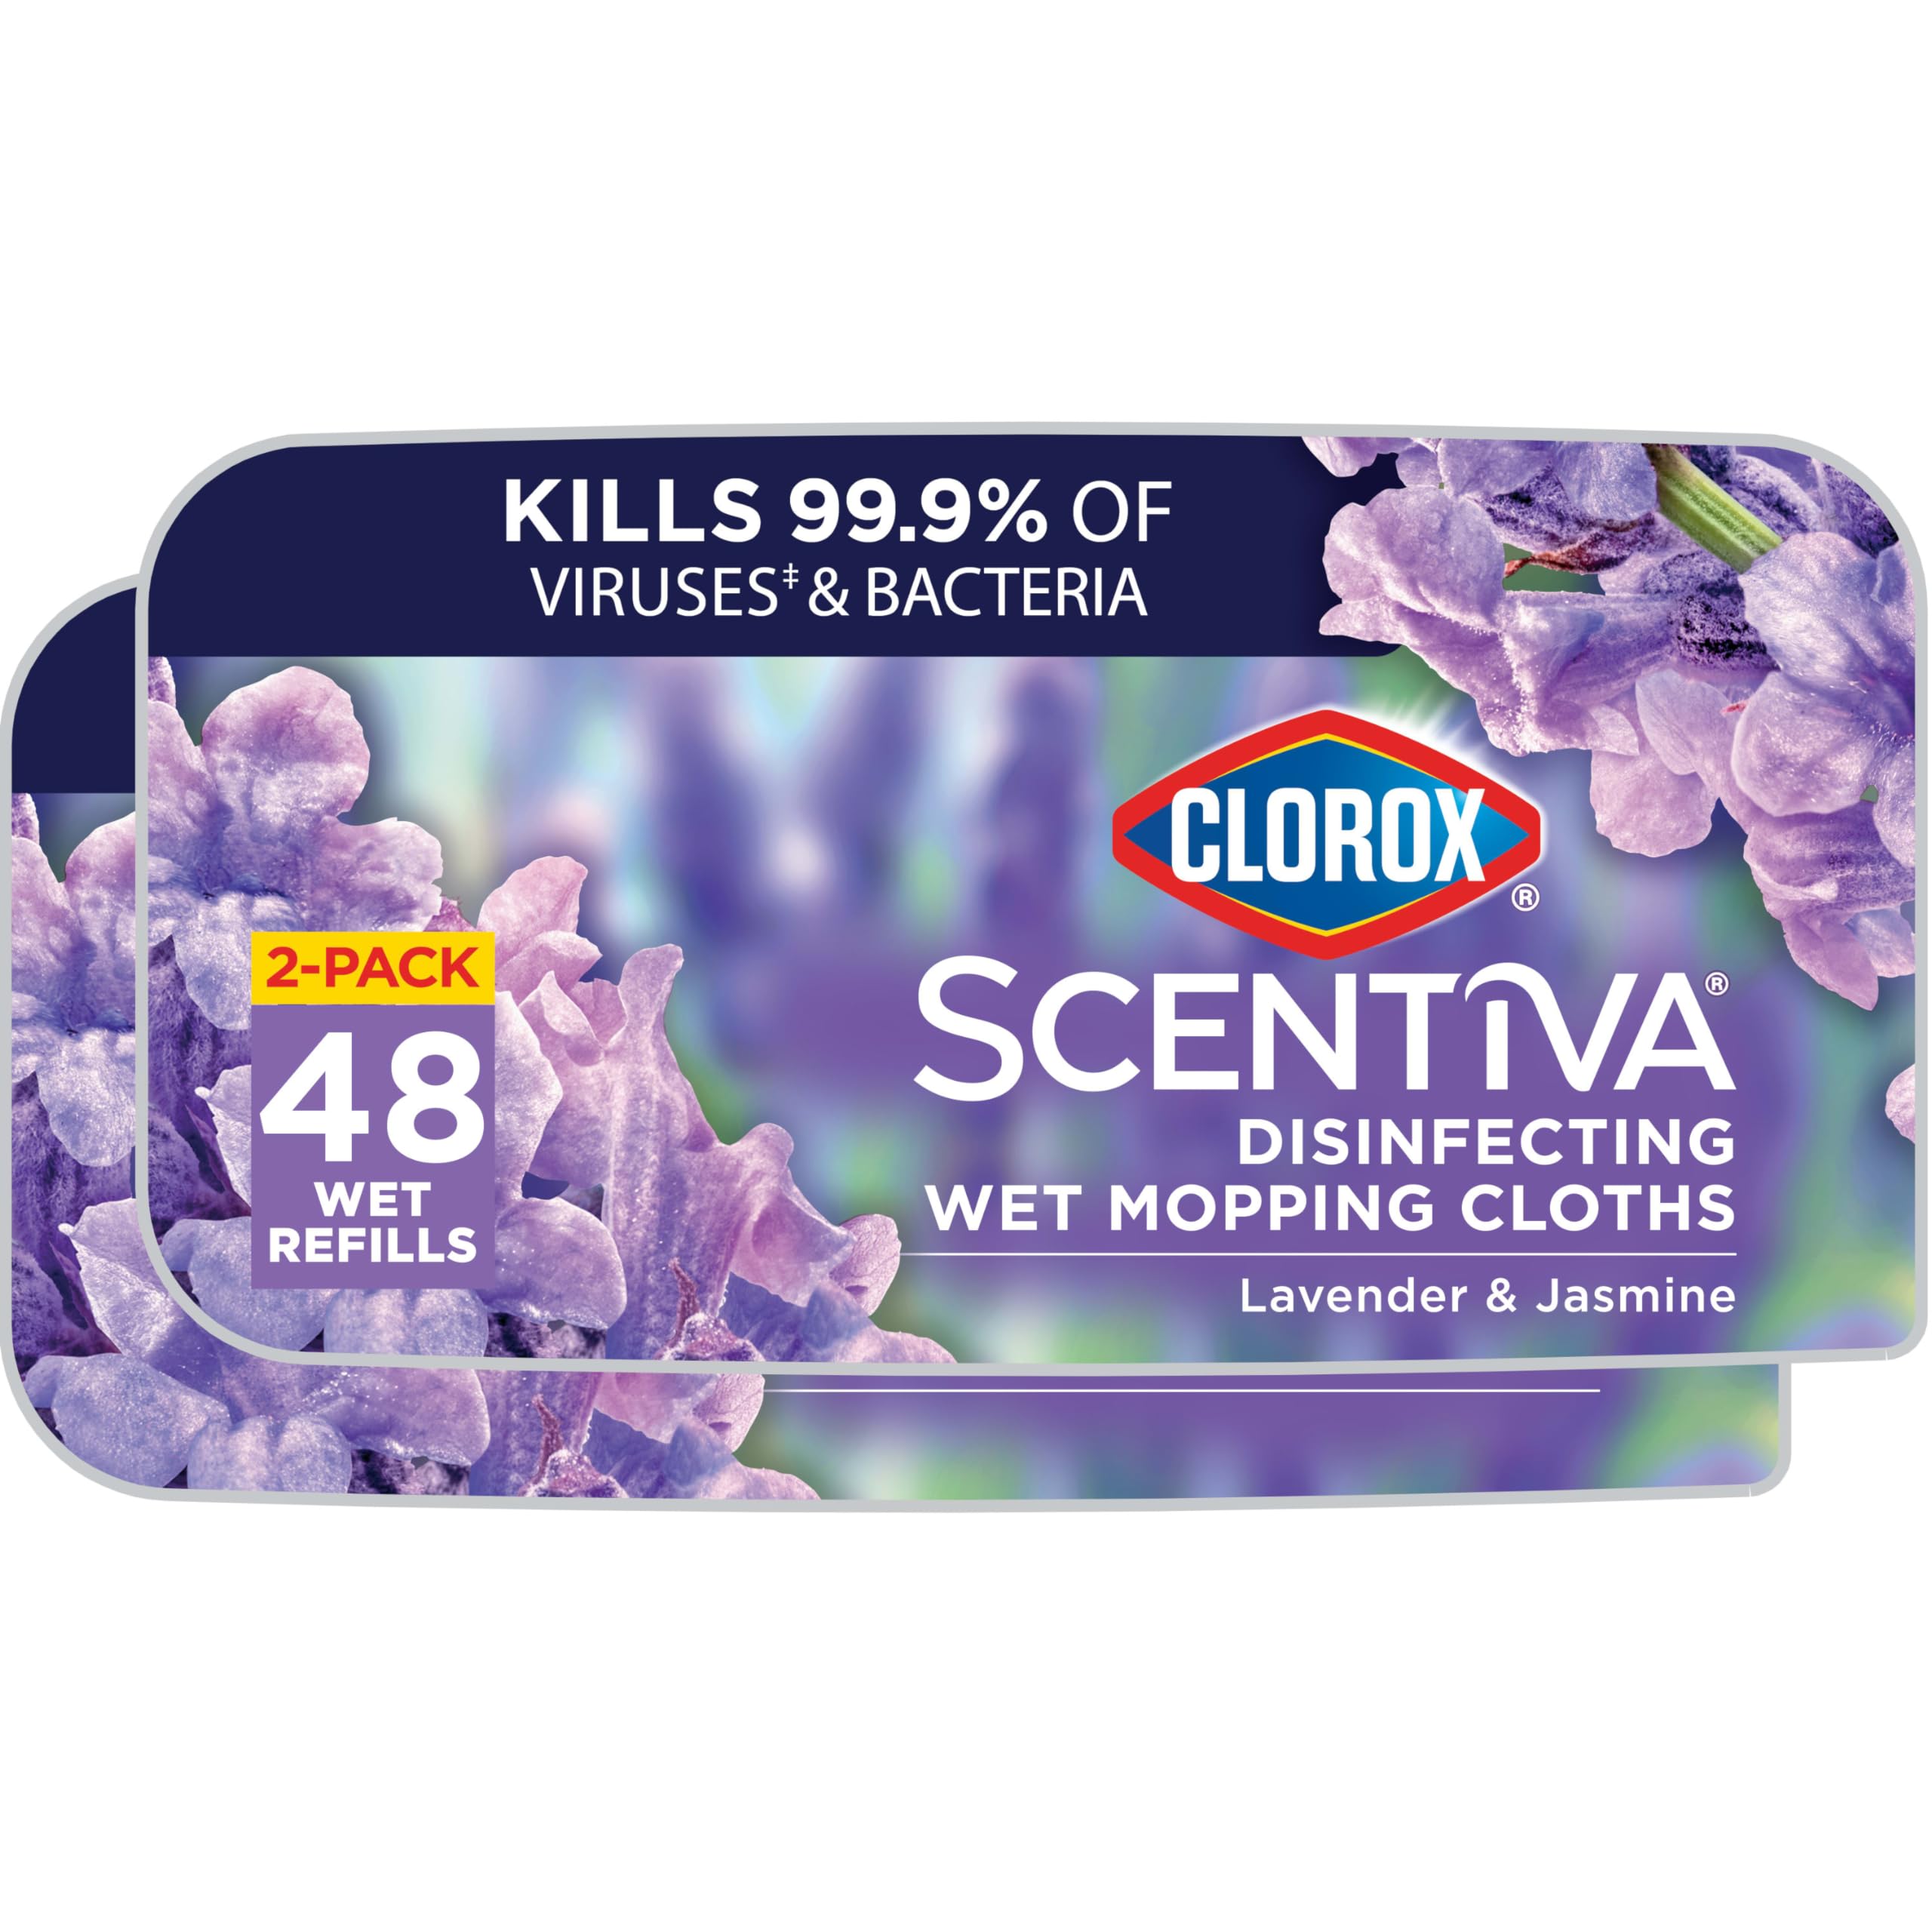 Clorox Scentiva Disinfecting Wet Mop Pad, Disposable Mop Heads, Multi-Surface Floor Wipes 2 Packs $8.19